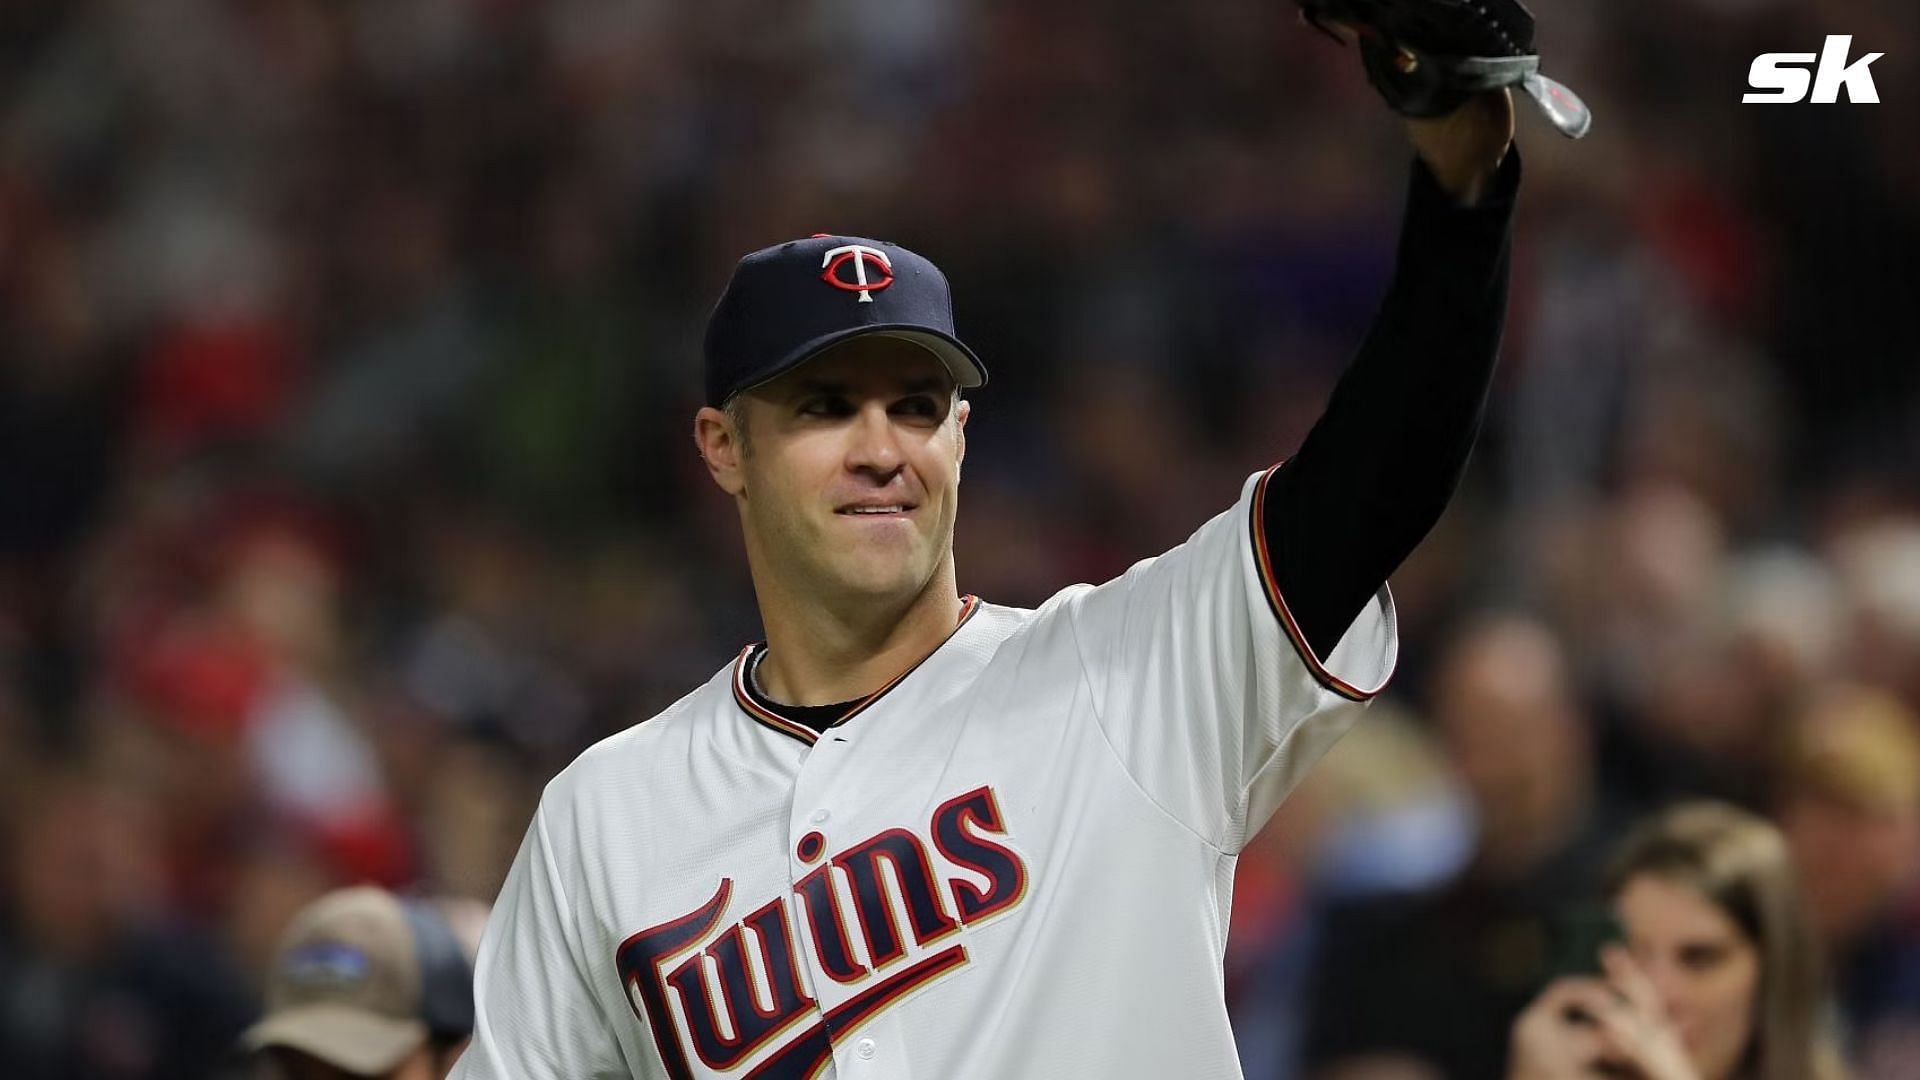 Minnesota Twins: Joe Mauer continues to cement himself in Twins